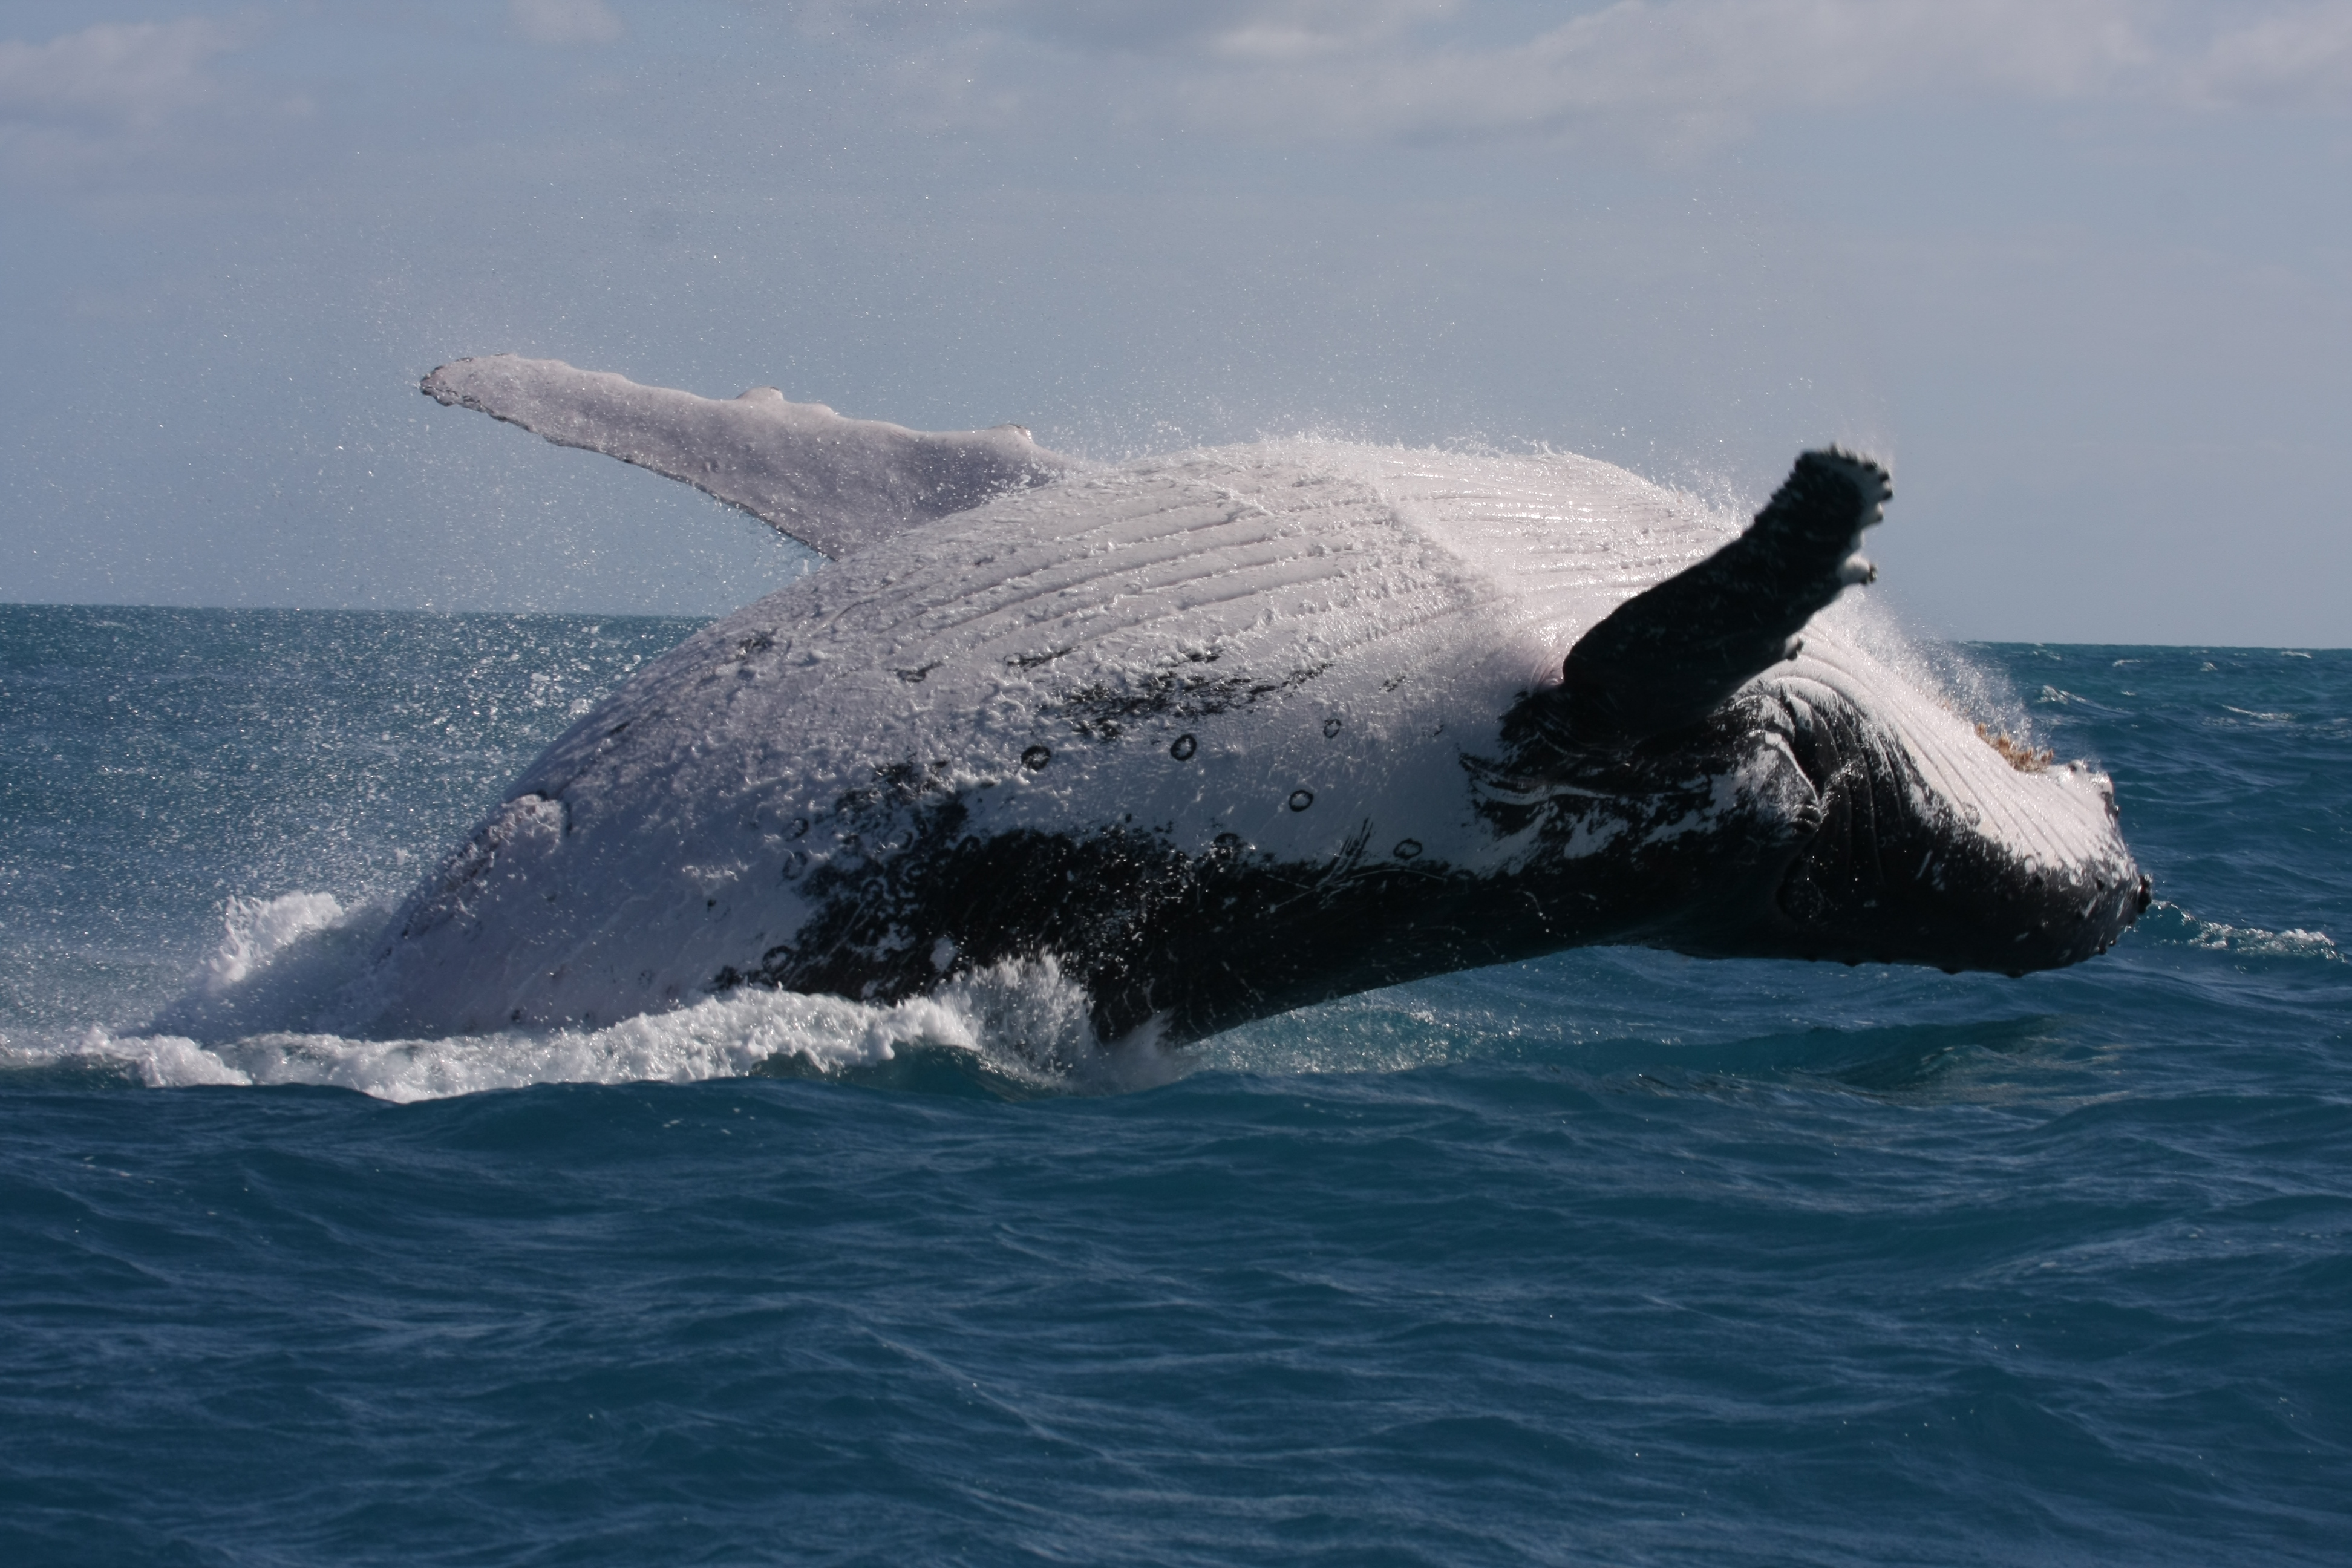 A surface-active adult humpback whale migrating along the eastern coastline of Australia. Though migrating, these animals are still undertaking breeding behaviours such as joining with, and competing over, available females. Credit: the Cetacean Ecology Group, University of Queensland.